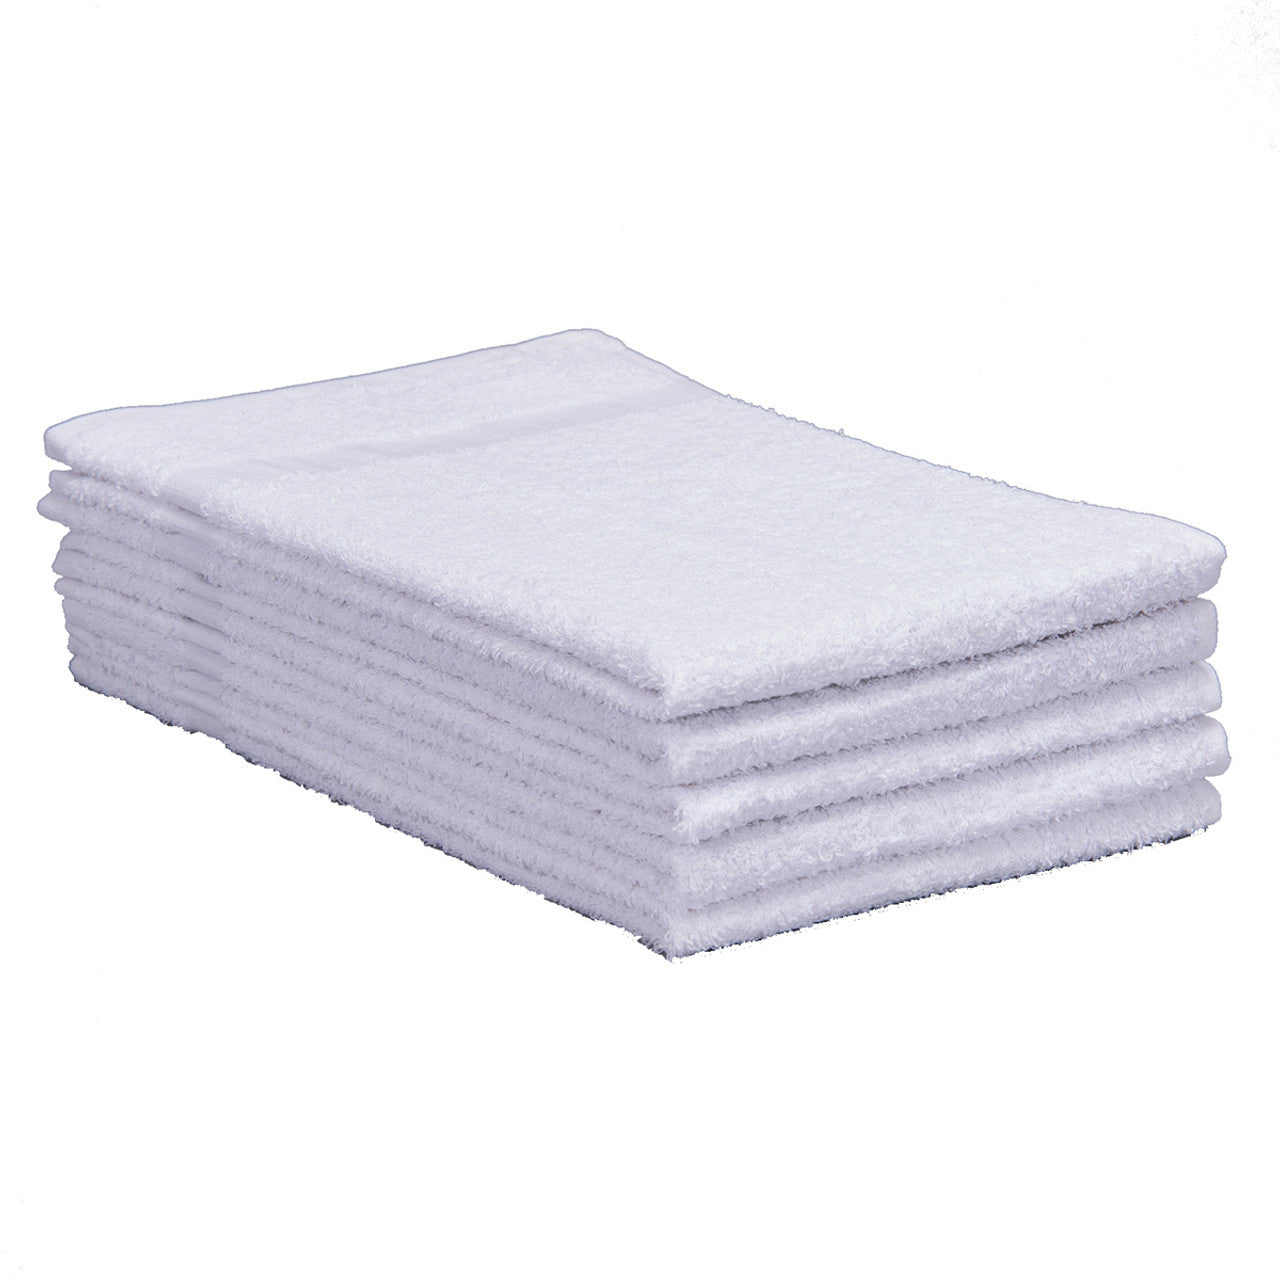 XCP CD-TOWEL-12 CAR Products White Cotton Terry Cloth Towels (12 pk)